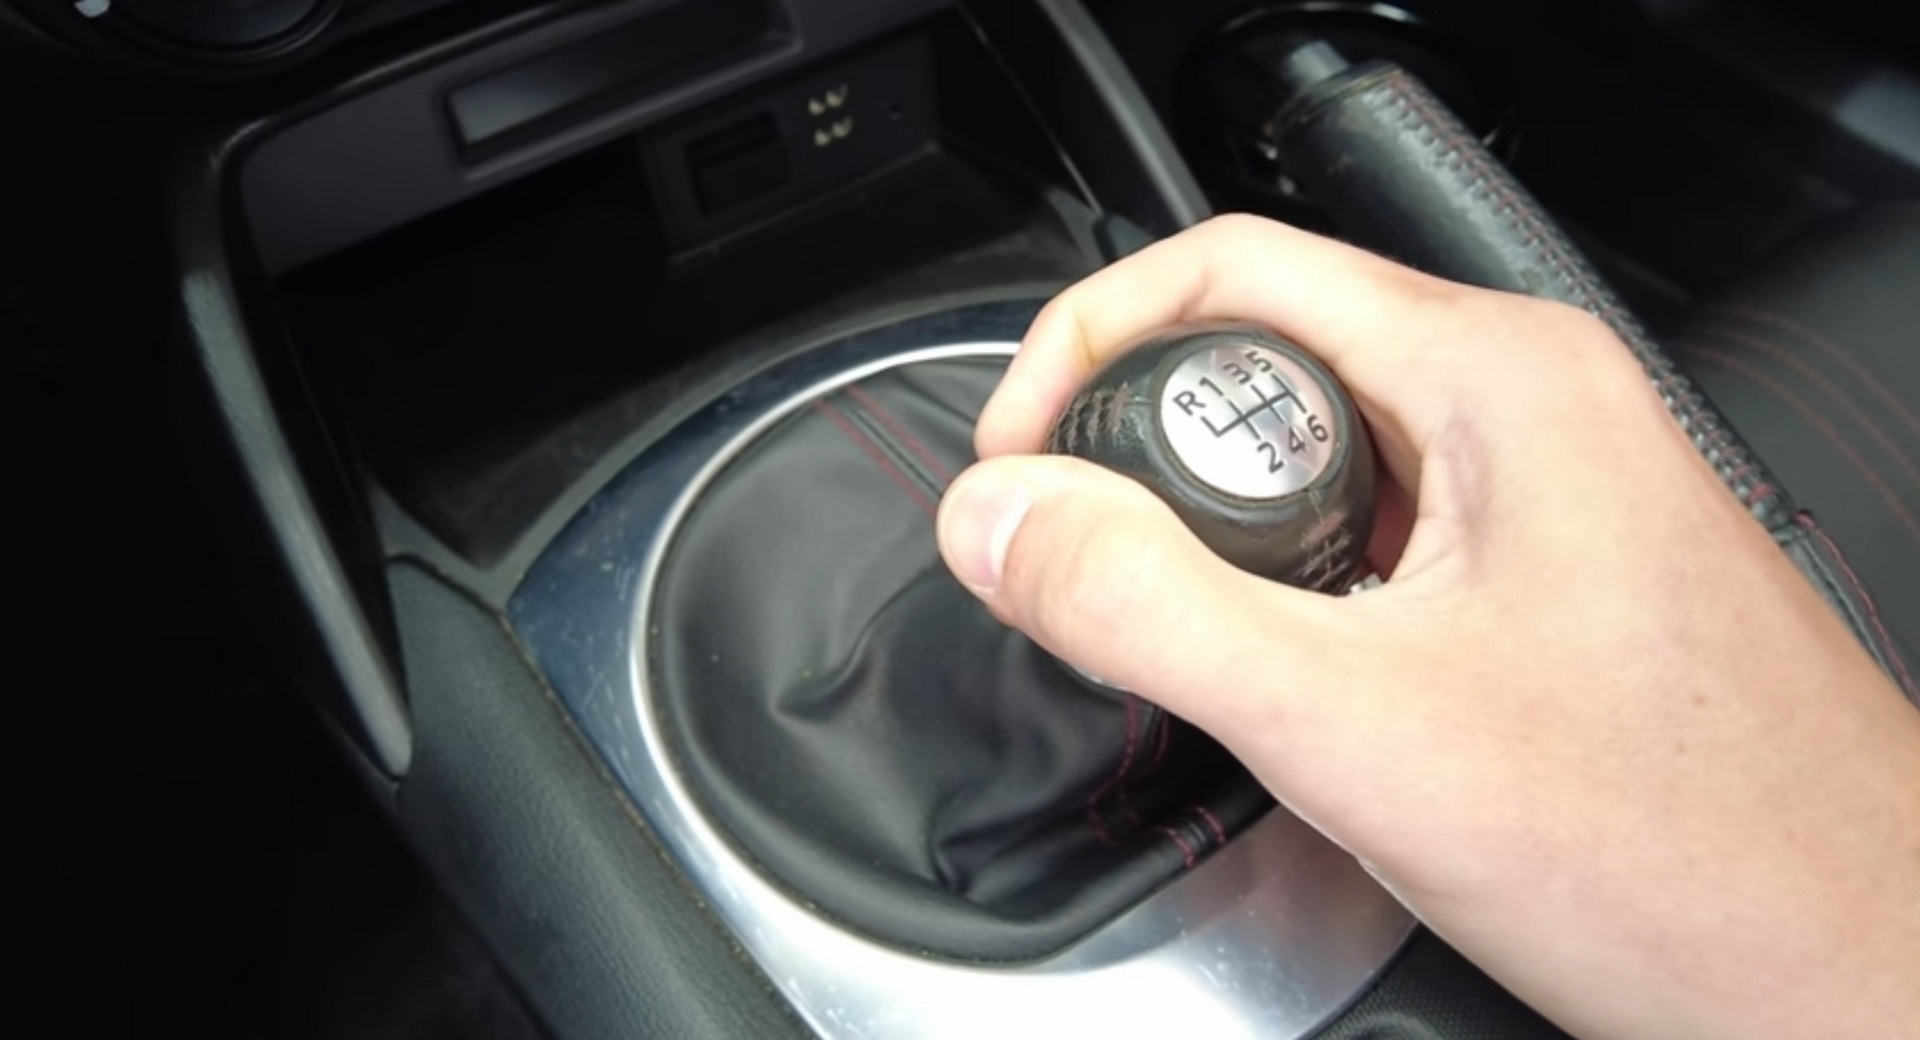 What Actually Happens When You “Money Shift” With A Manual Transmission